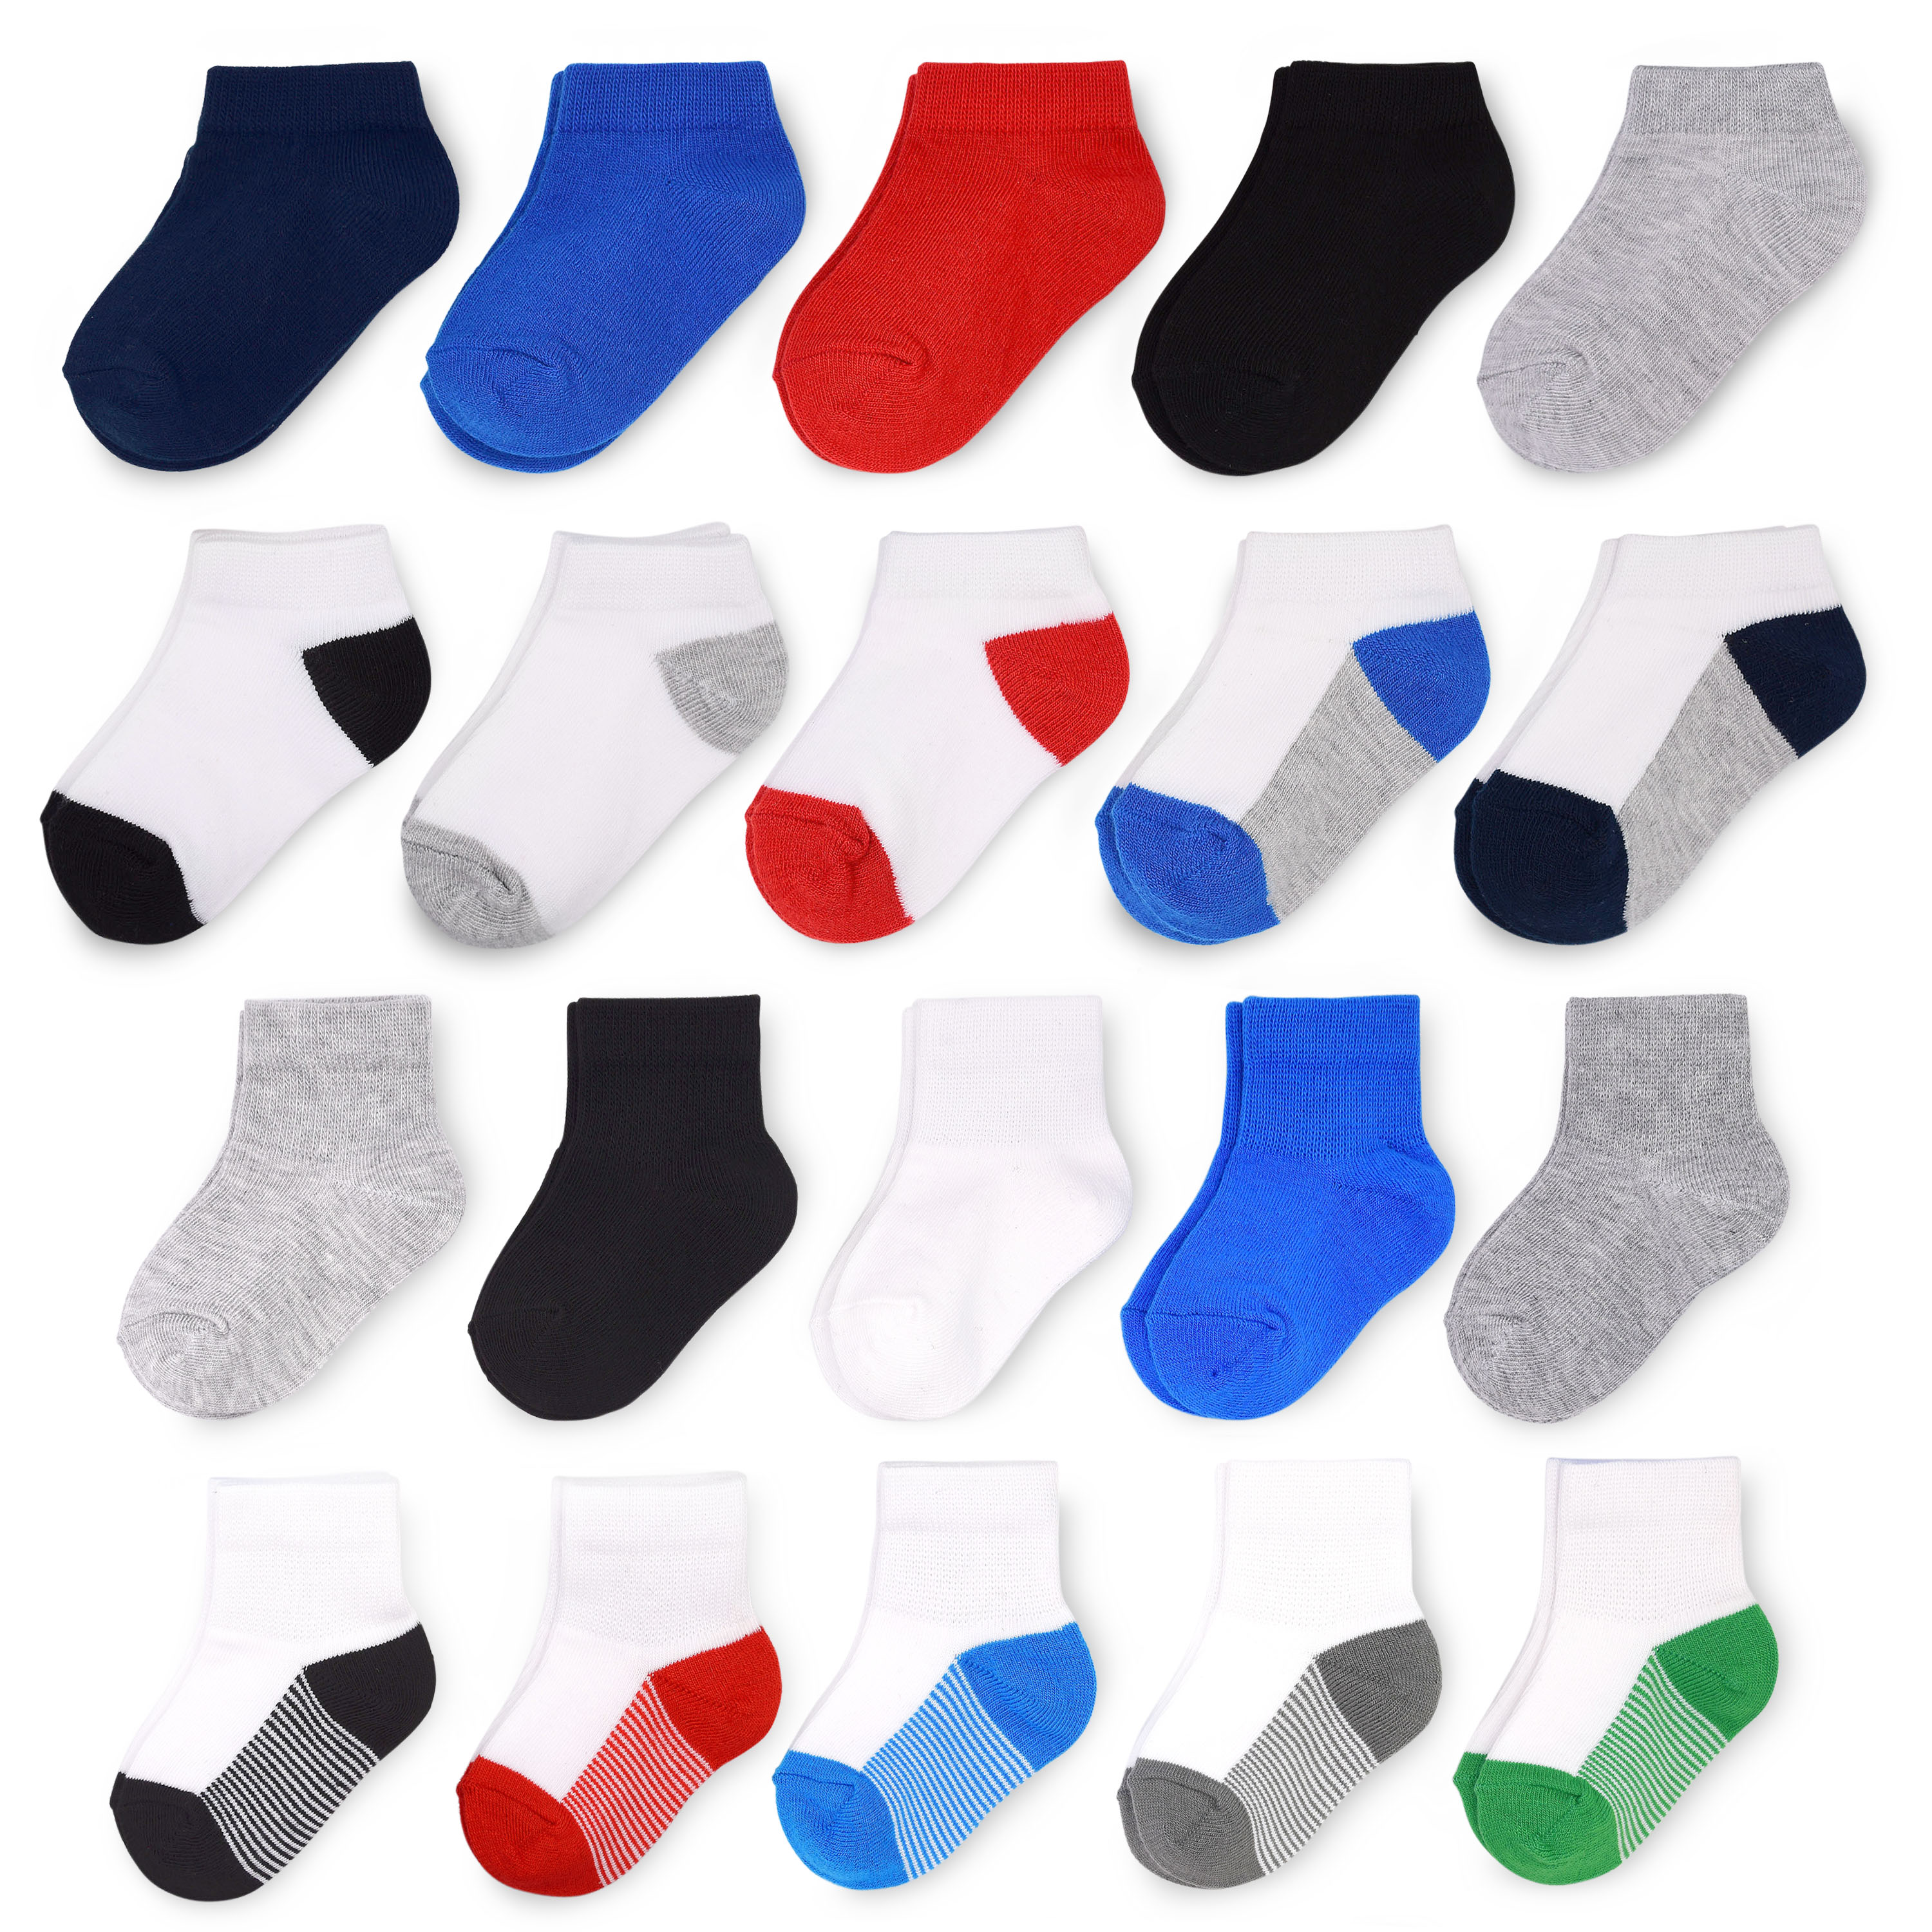 Fruit of the Loom Baby and Toddler Boy Low Cut and Ankle Socks, 20-Pack, Size 6M-5T - image 1 of 10